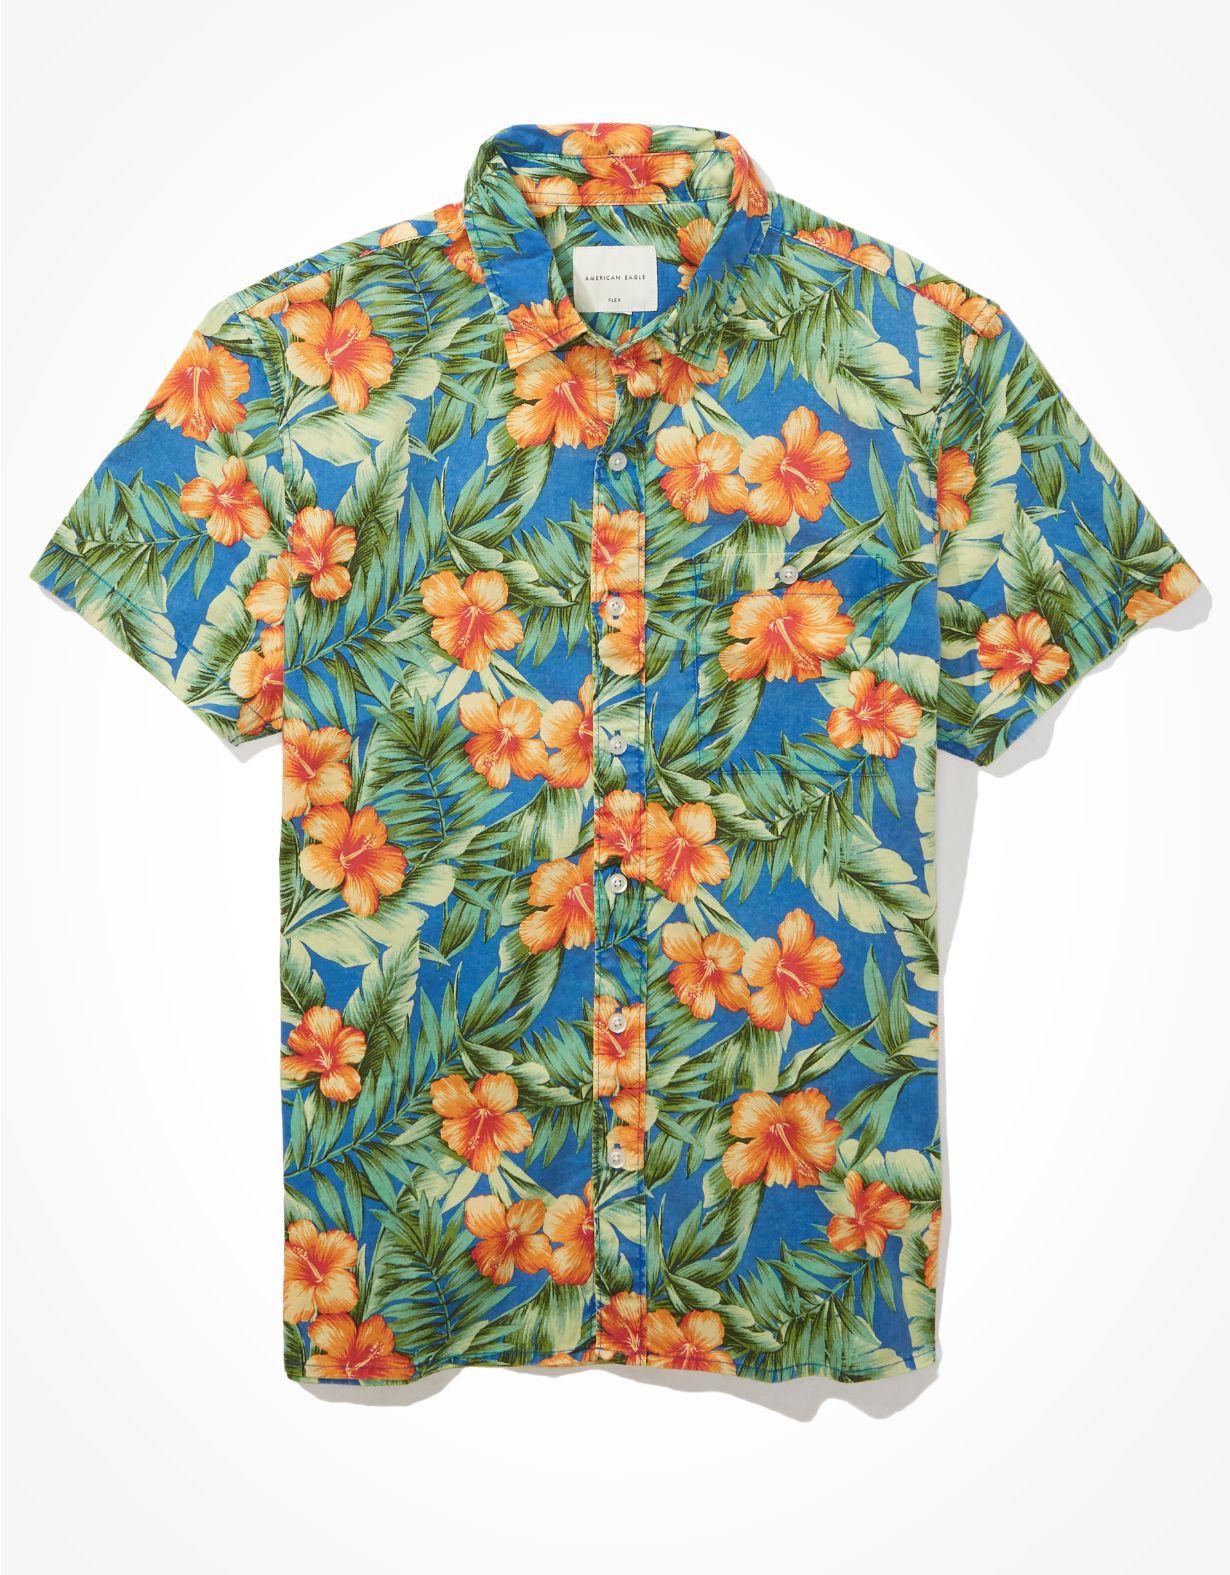 AE Floral Short-Sleeve Button-Up Shirt